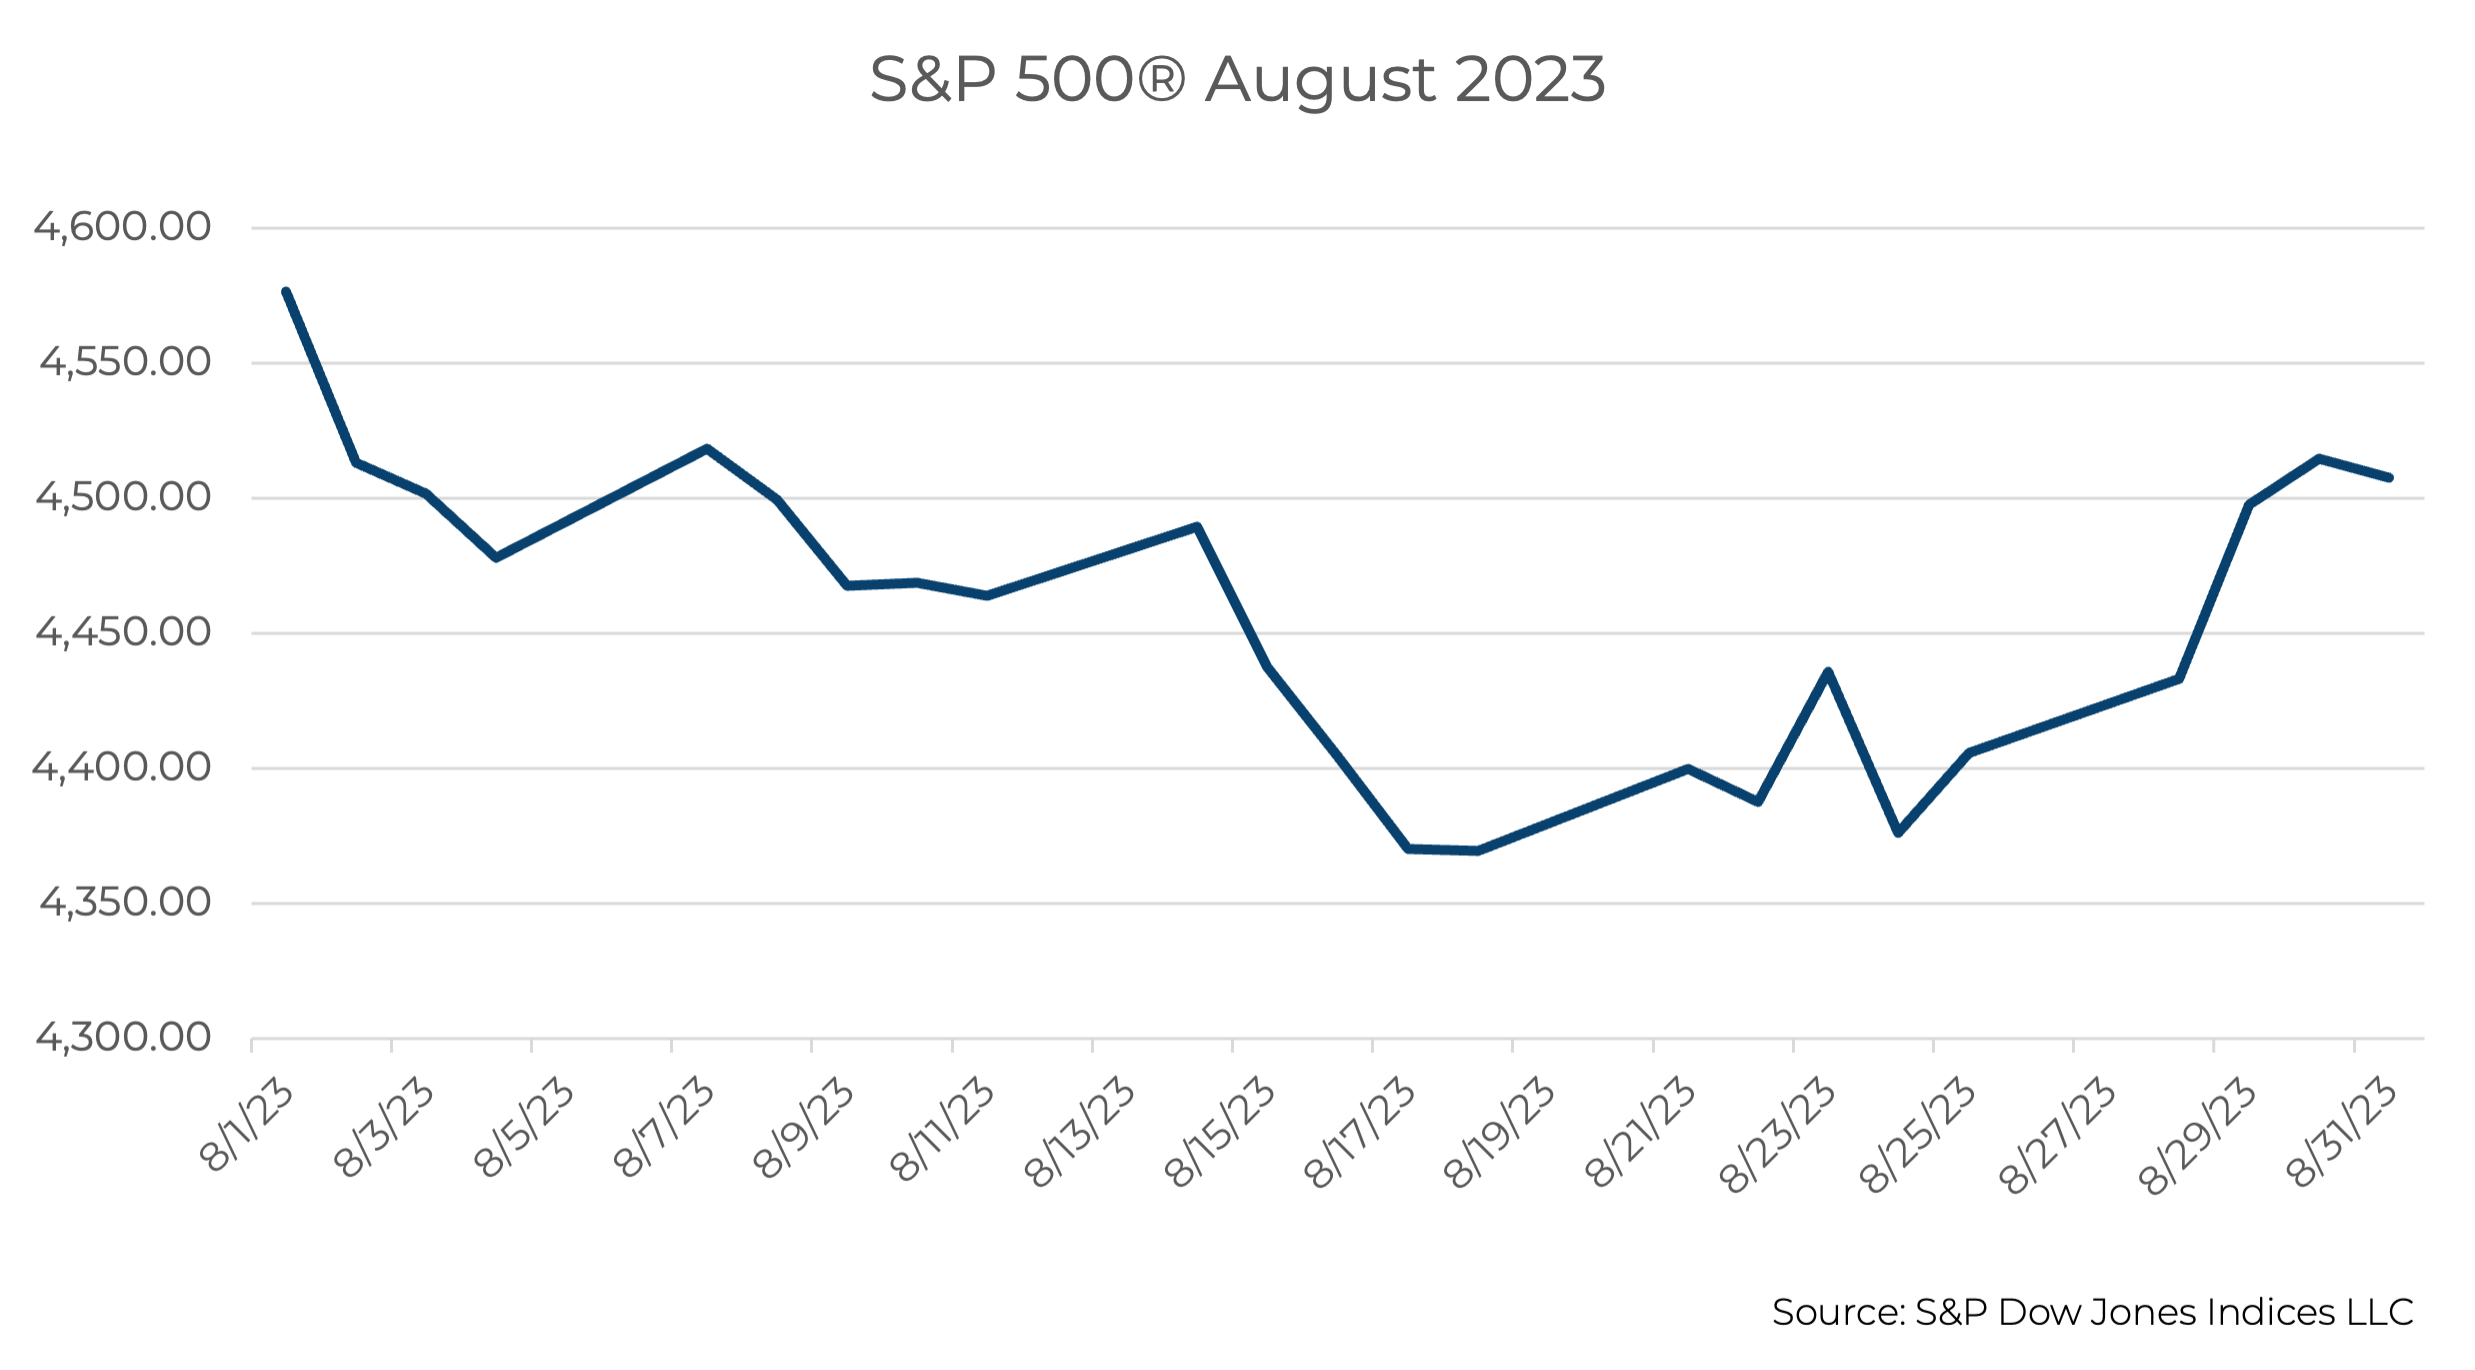 S&P 500 August 2023